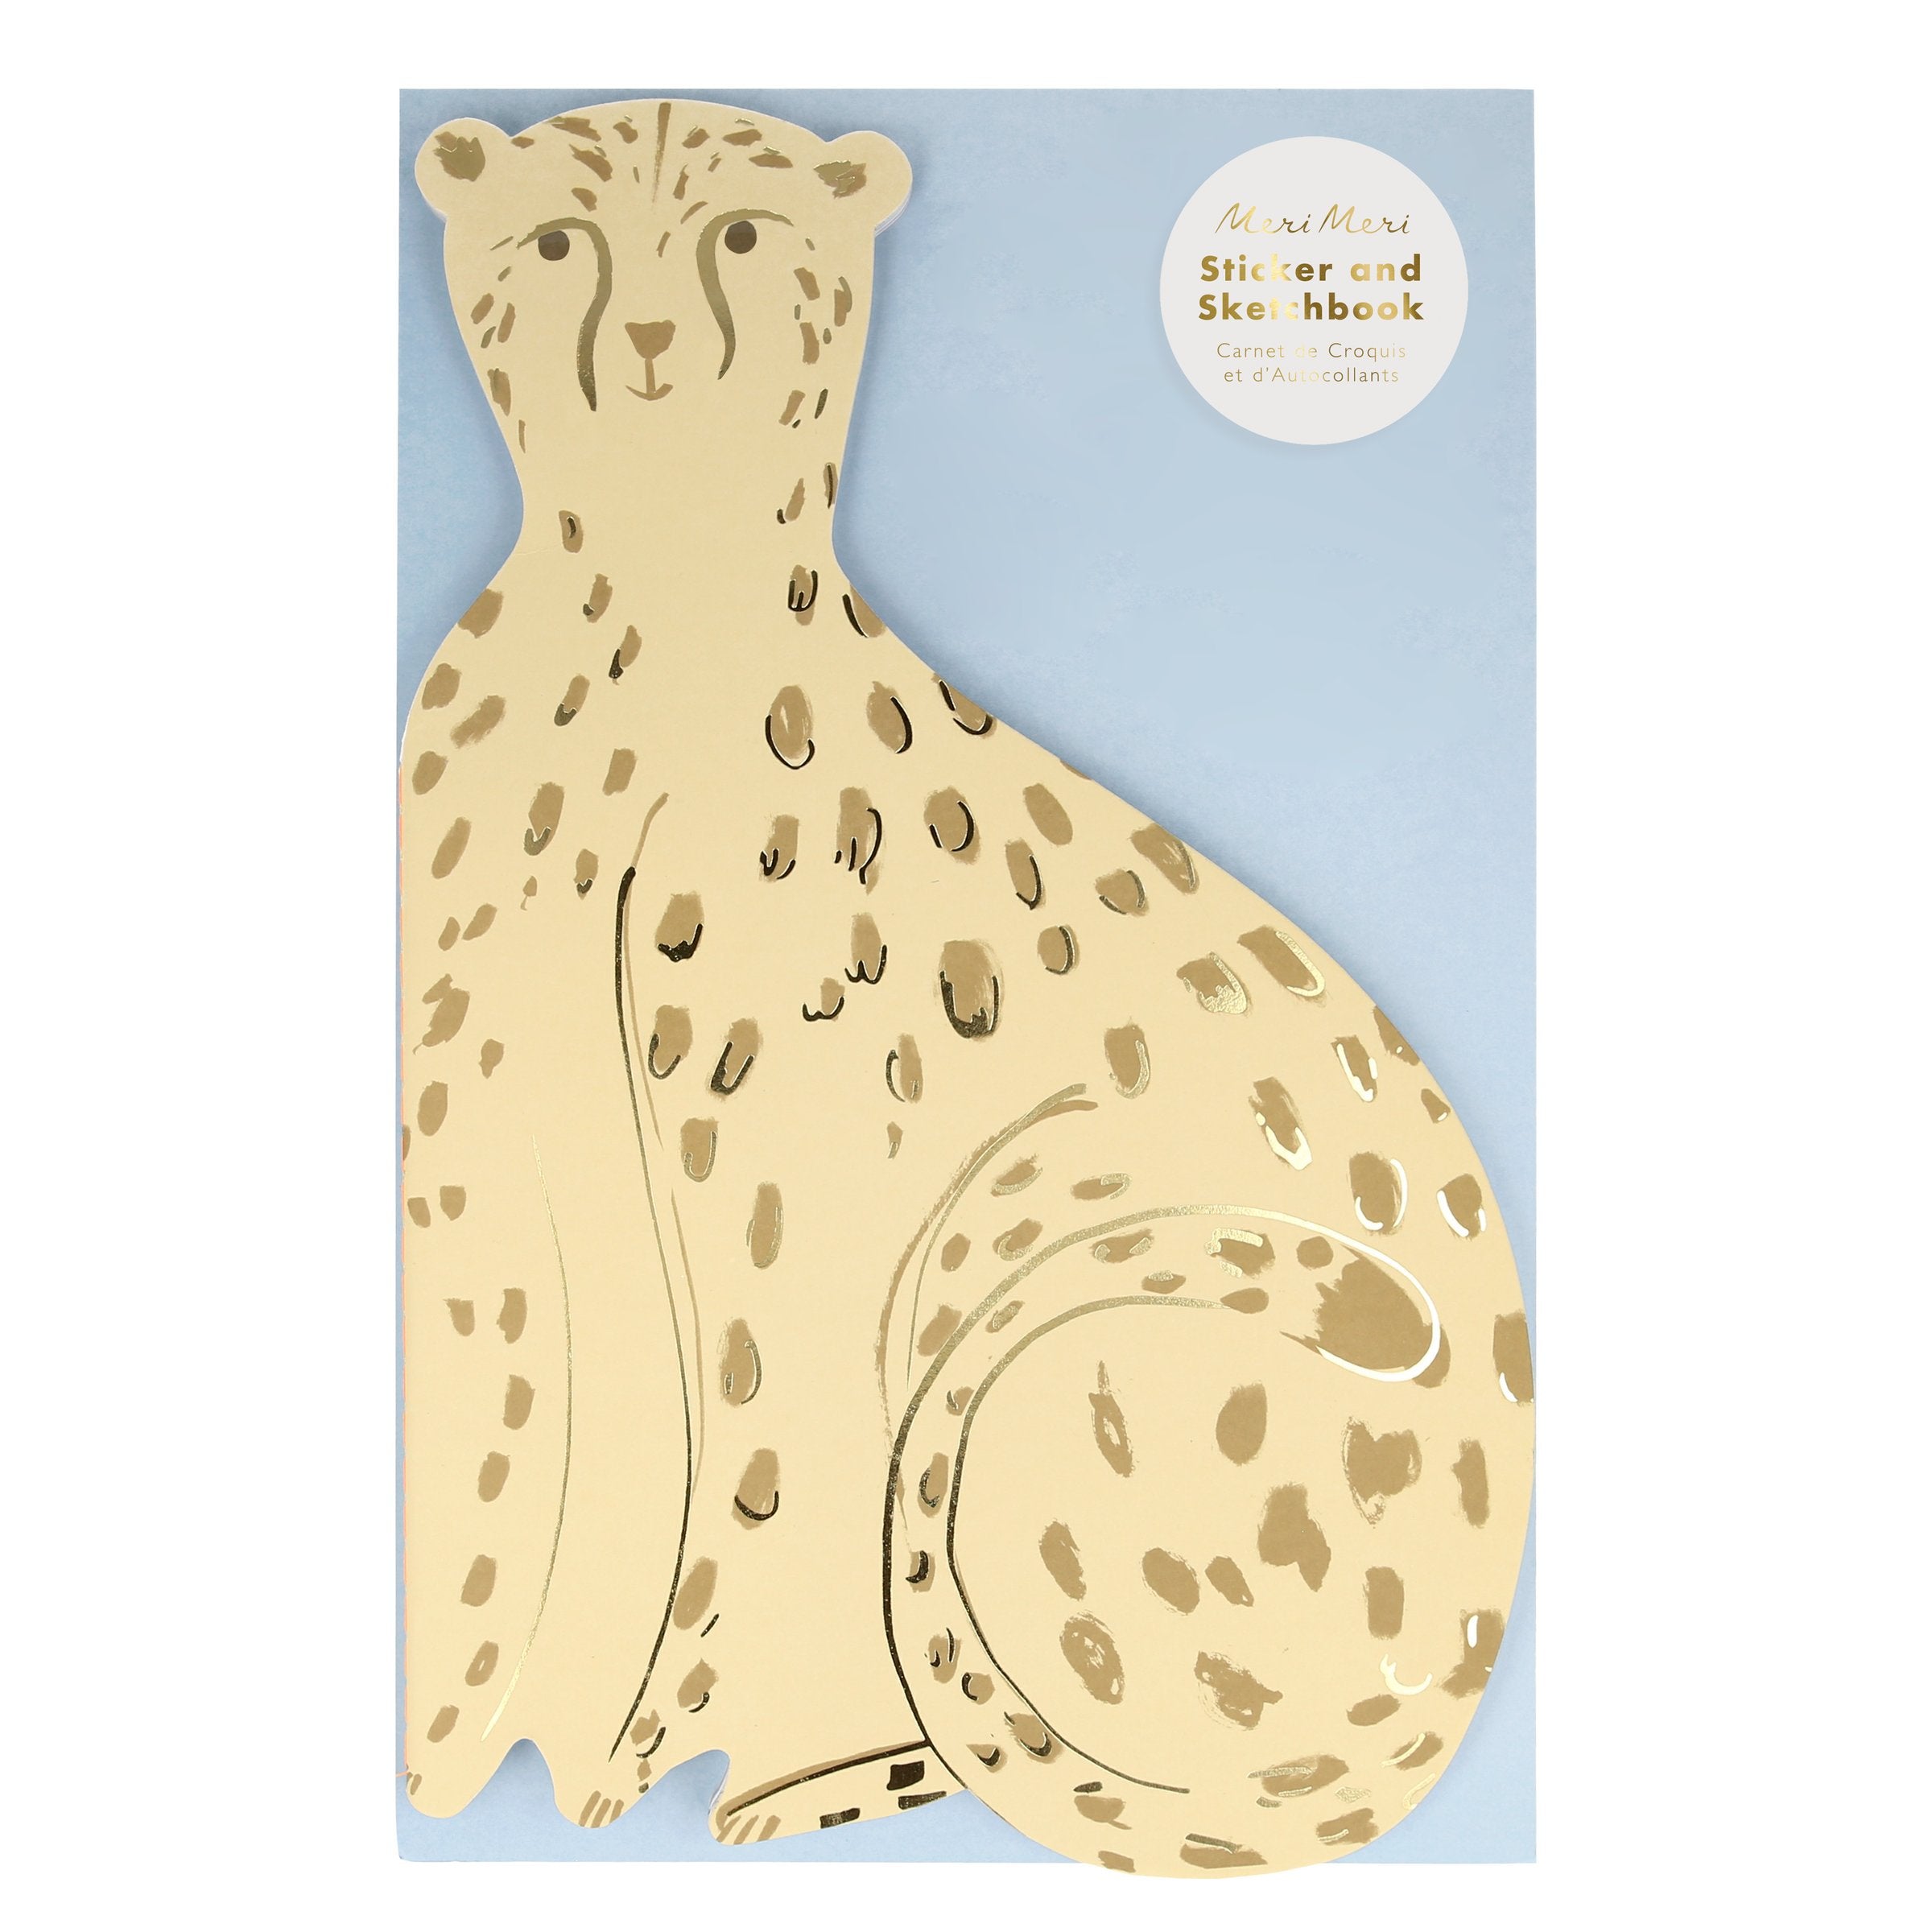 Our cheetah art book contains stickers and sketch pages, ideal to pop into safari party bags.